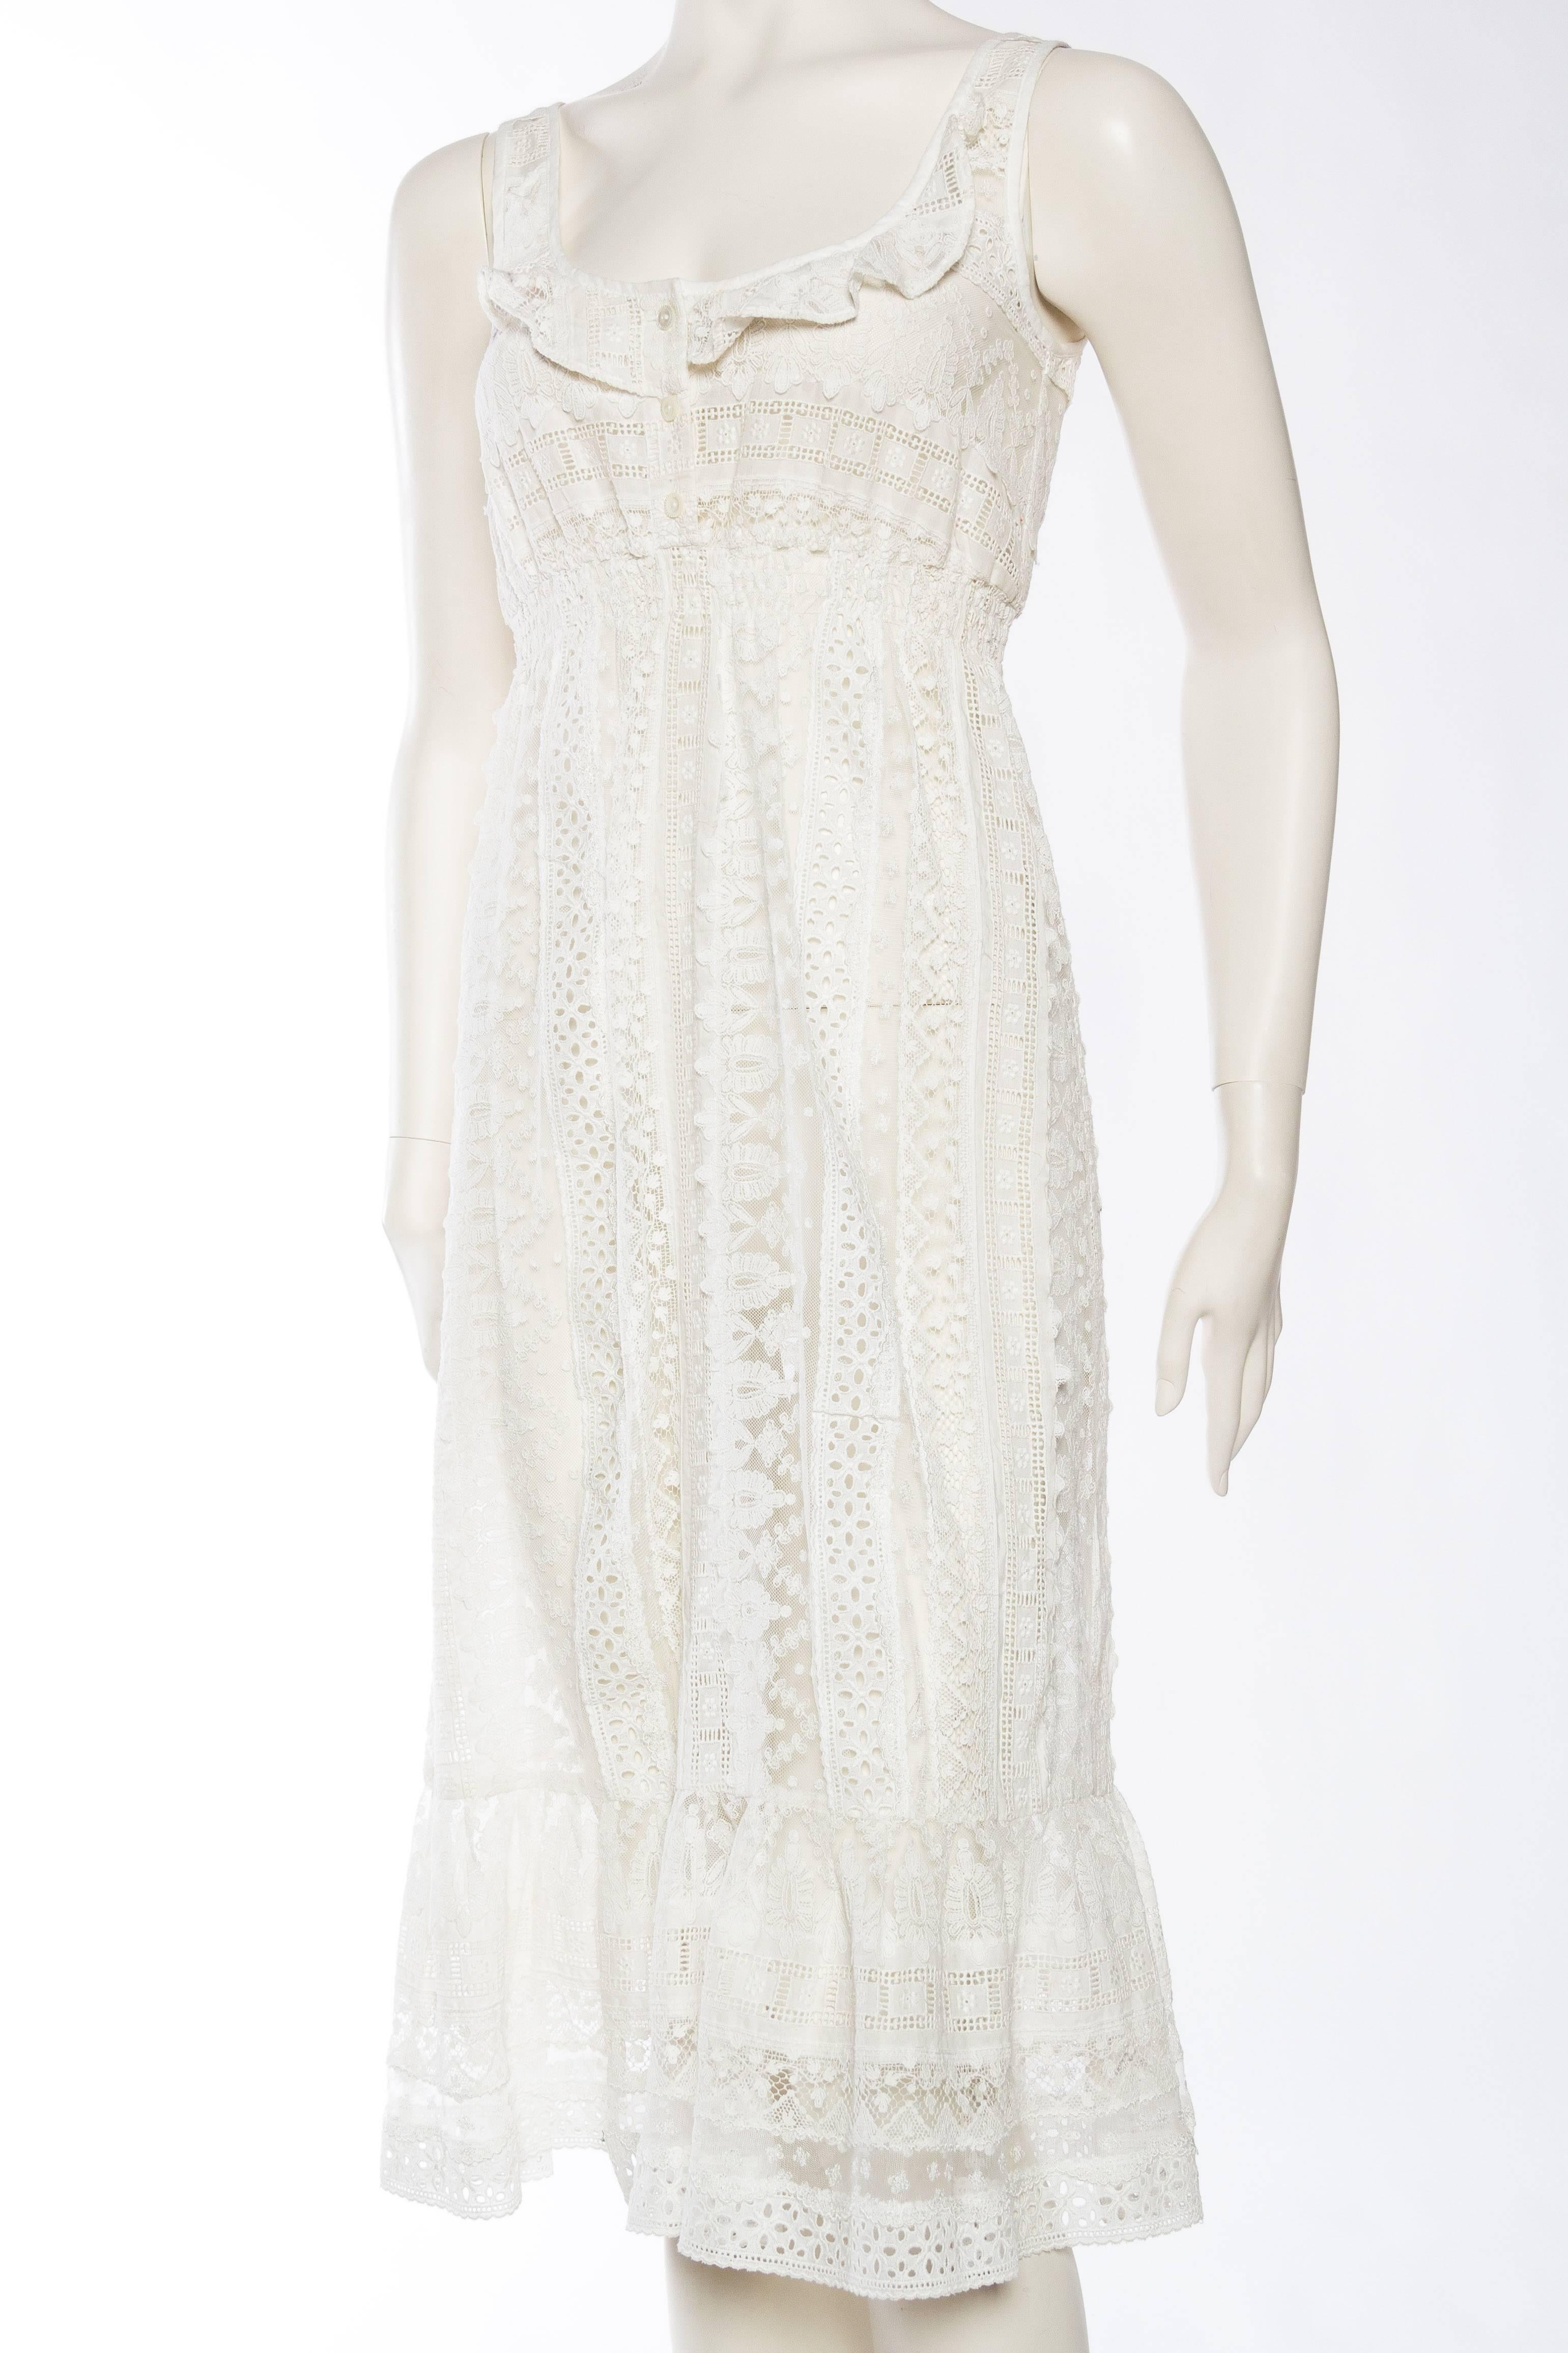 From the 1970s in an Edwardian or Victorian style this dress was purchased in Paris and appears to have been made there. Beautiful sheer cotton has been fully embroidered with a lovely eyelet pattern and pieced with net lace. The dress is finished